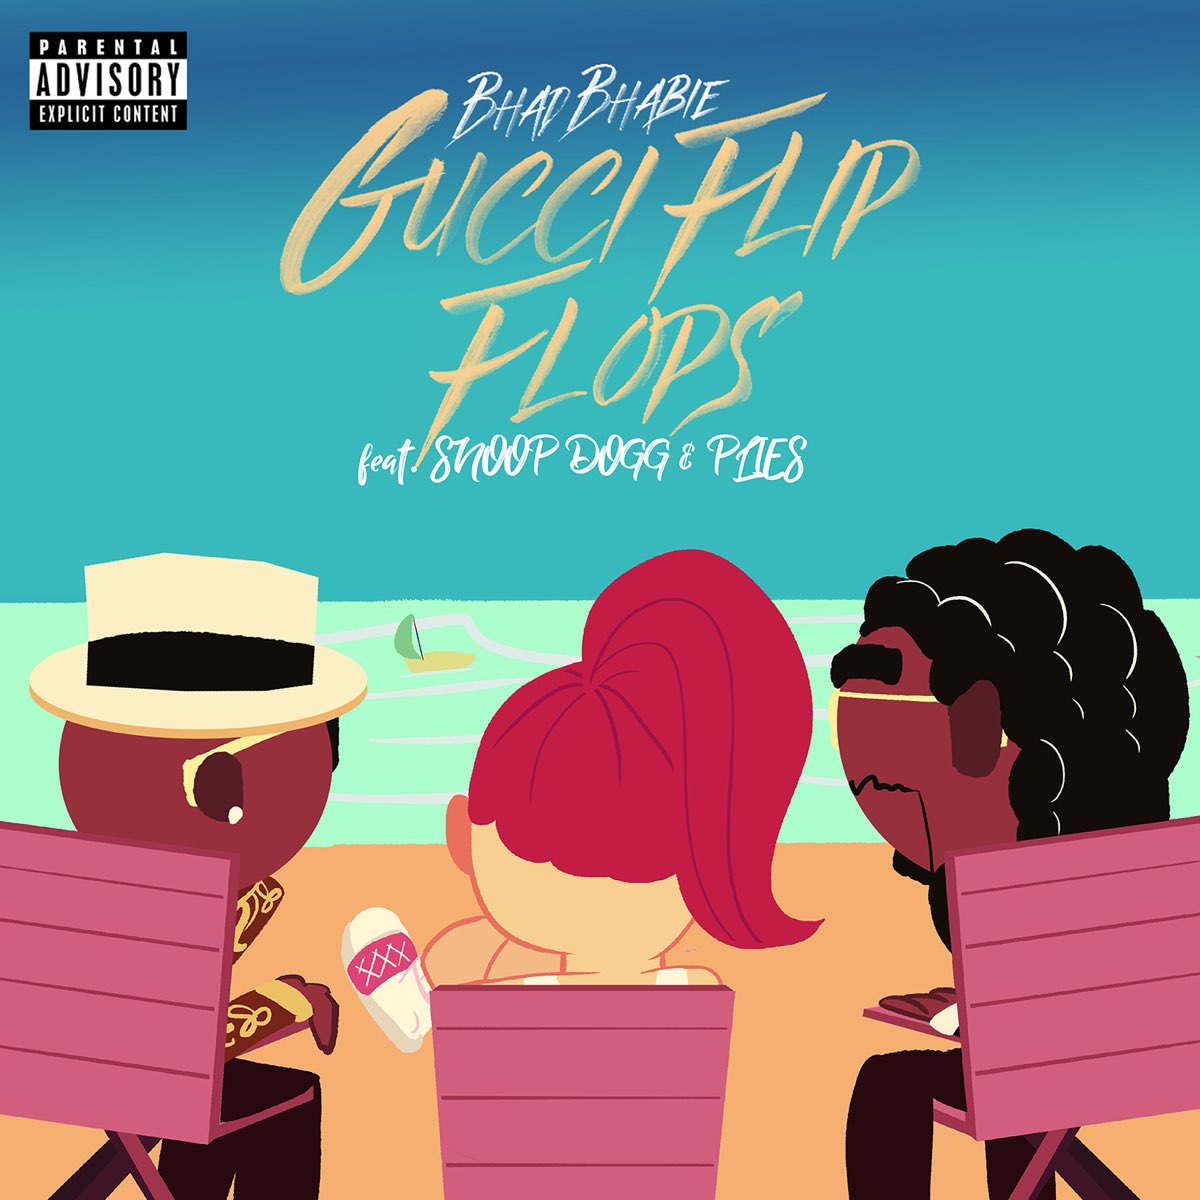 Gucci Flip Flops (feat. Snoop Dogg & Plies) [Remix] - Single by Bhad Bhabie  on Apple Music